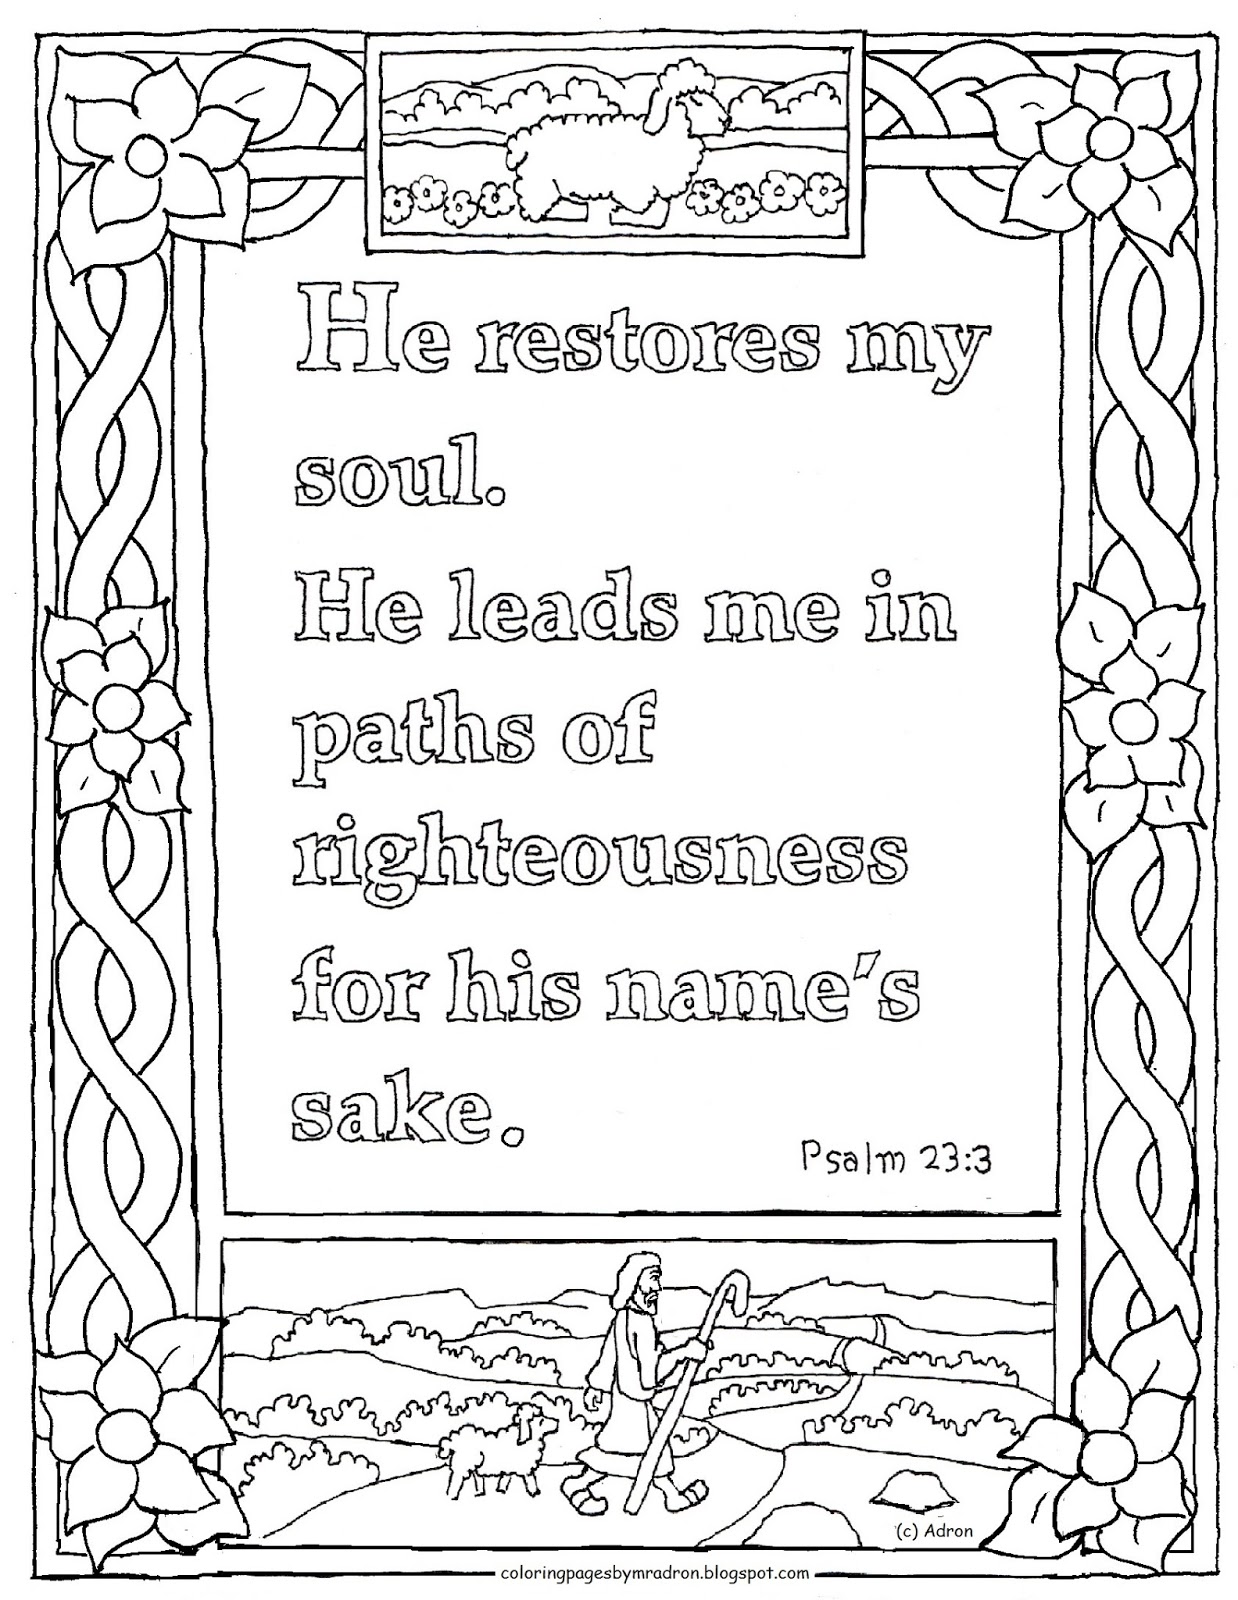 psalm-23-3-jpg-1-238-1-600-k-ppont-bible-coloring-pages-bible